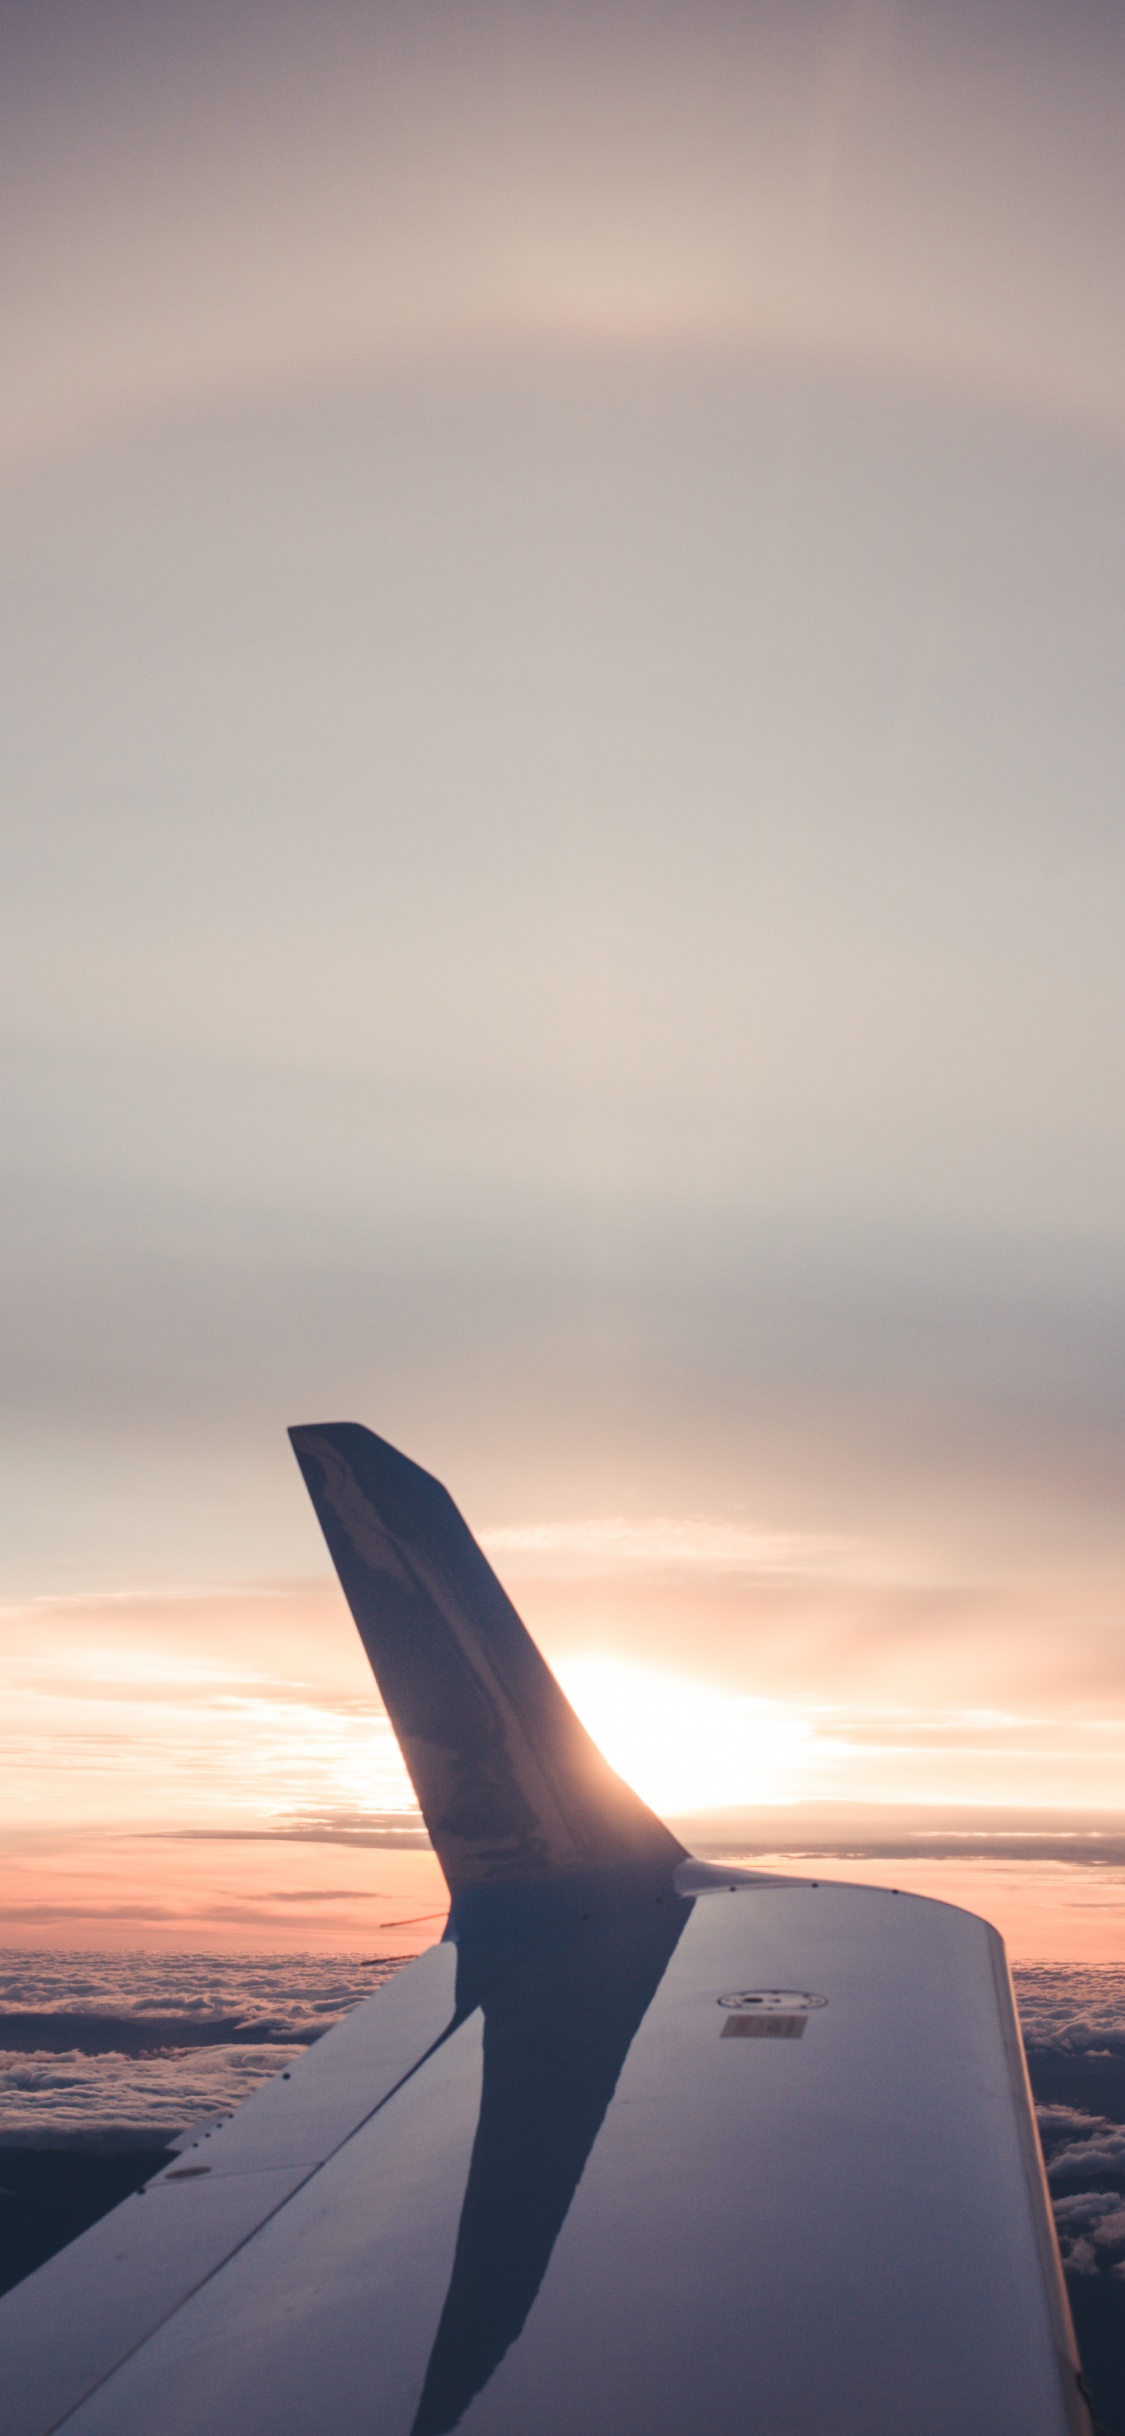 White and Black Airplane Wing During Daytime. Wallpaper in 1125x2436 Resolution